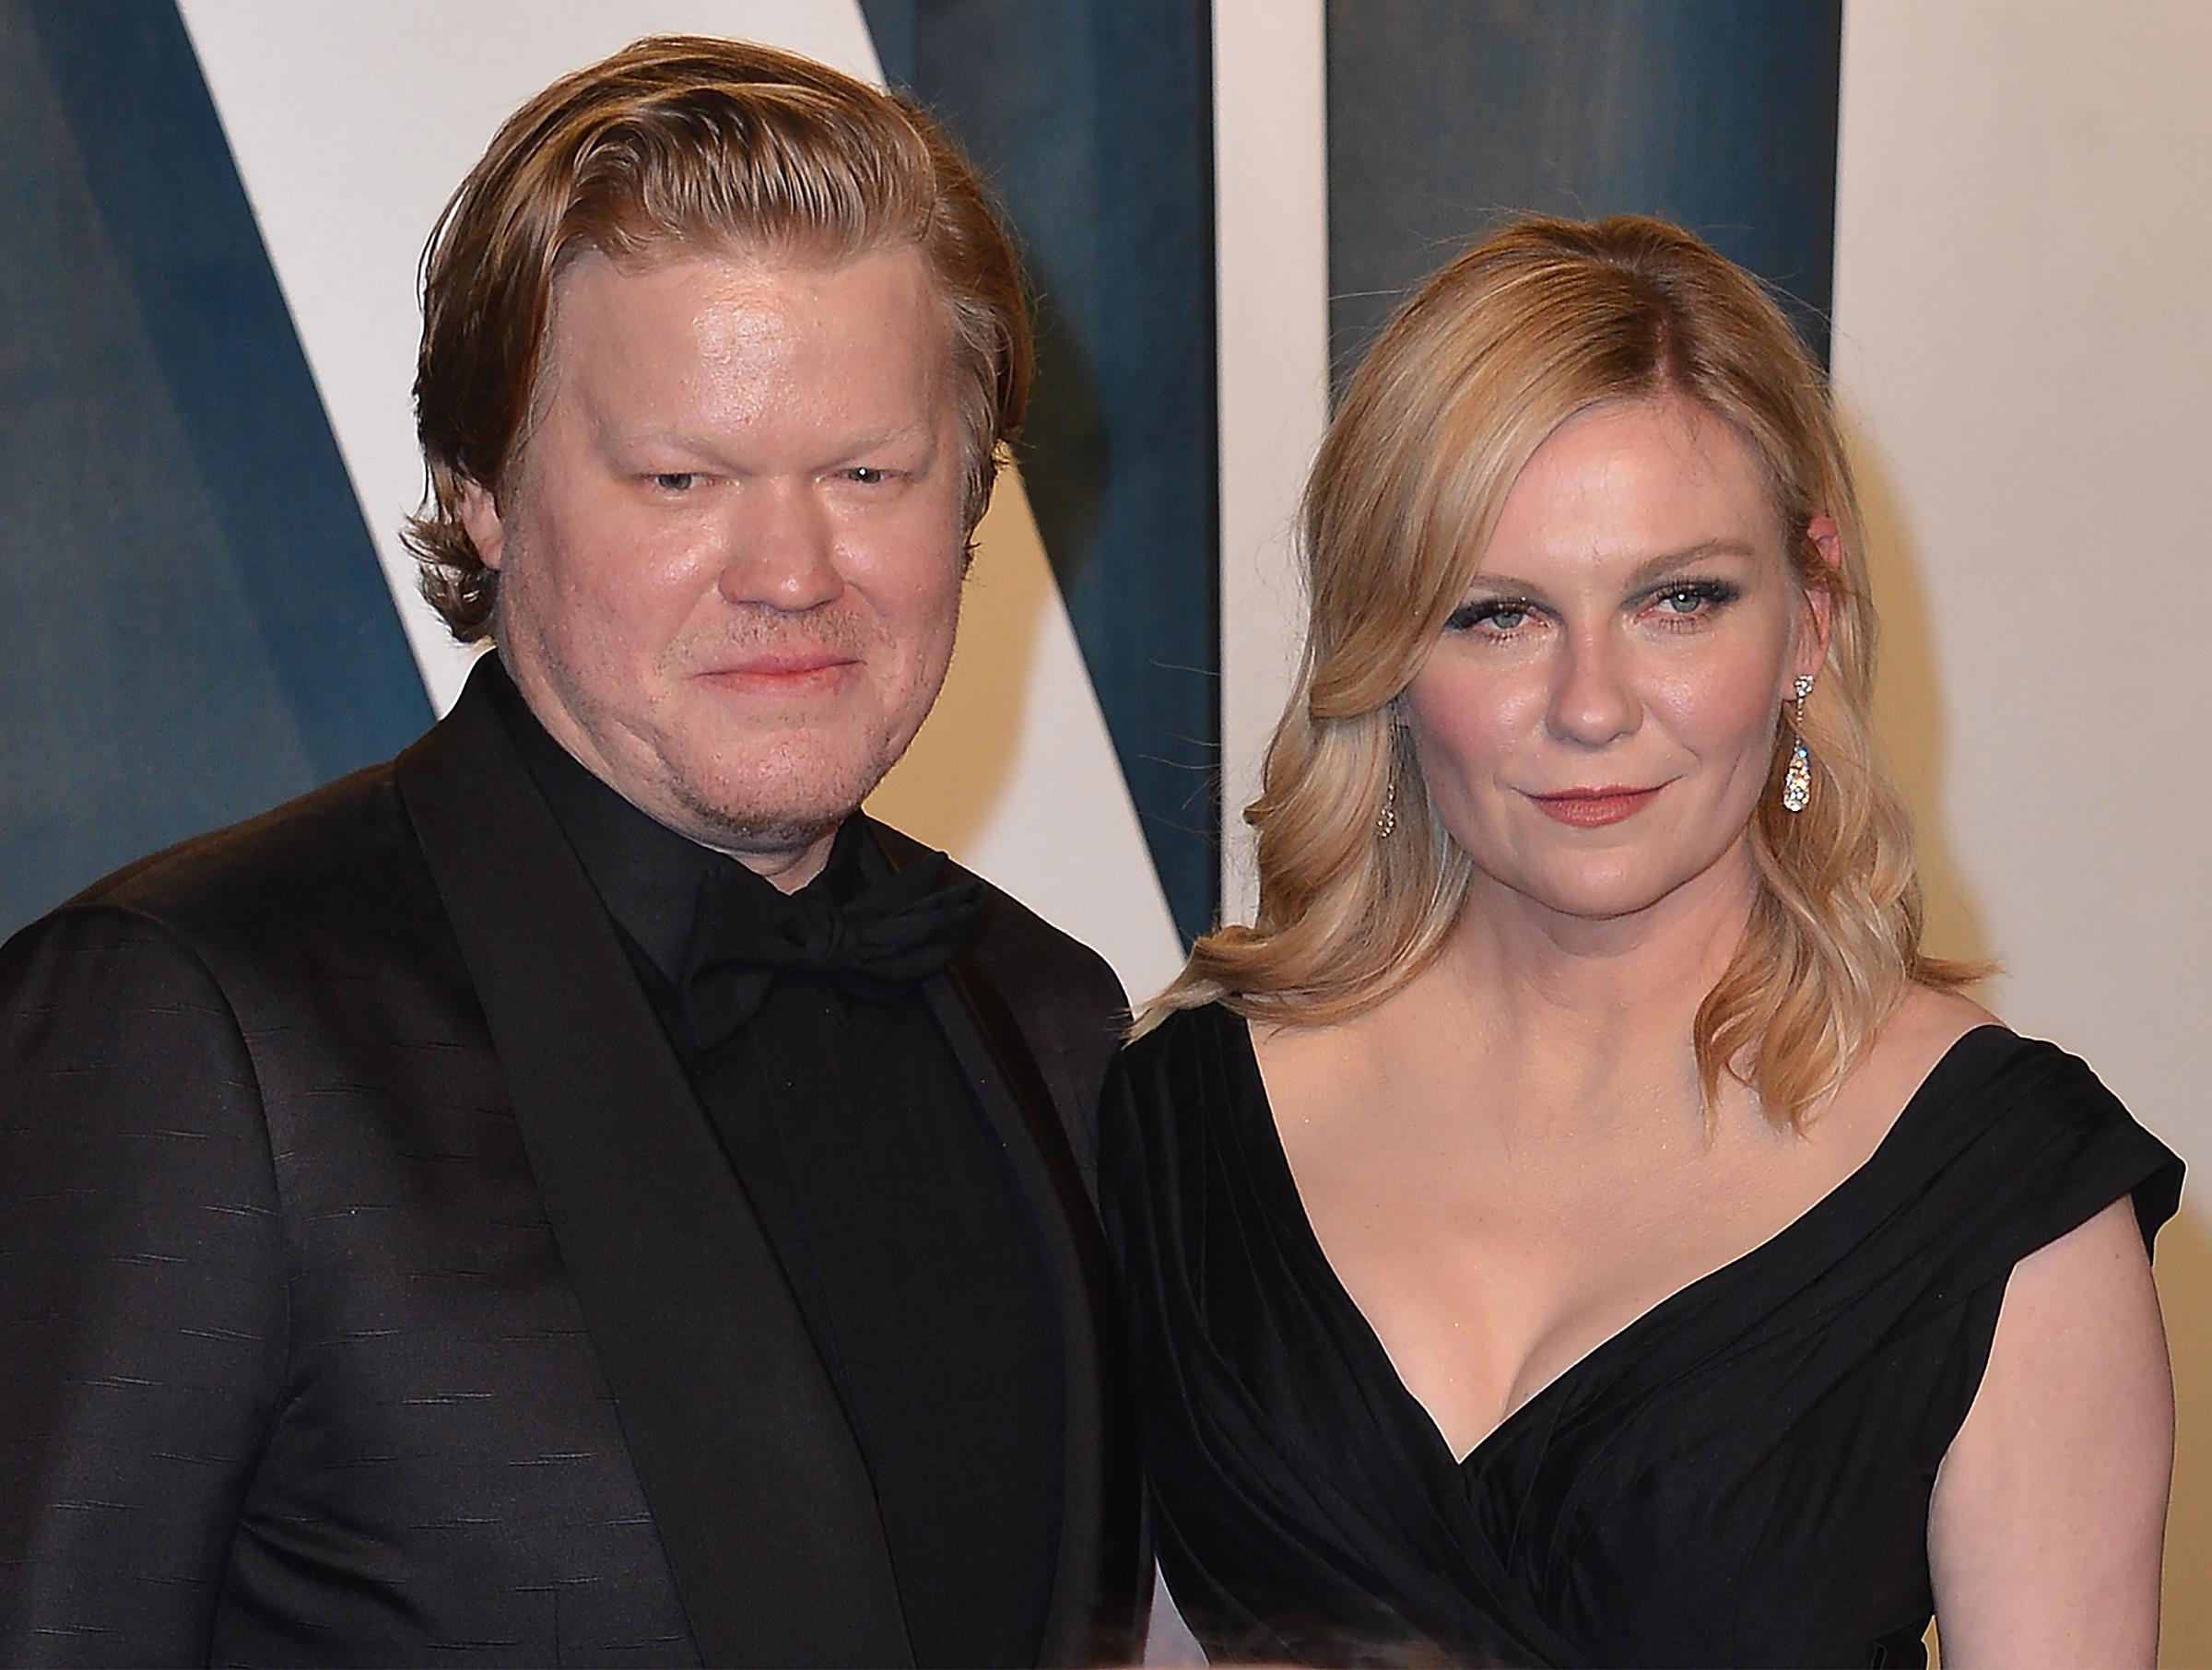 Kirsten Dunst and Jesse Plemons at the 2022 Vanity Fair Oscar Party in Beverly Hills California